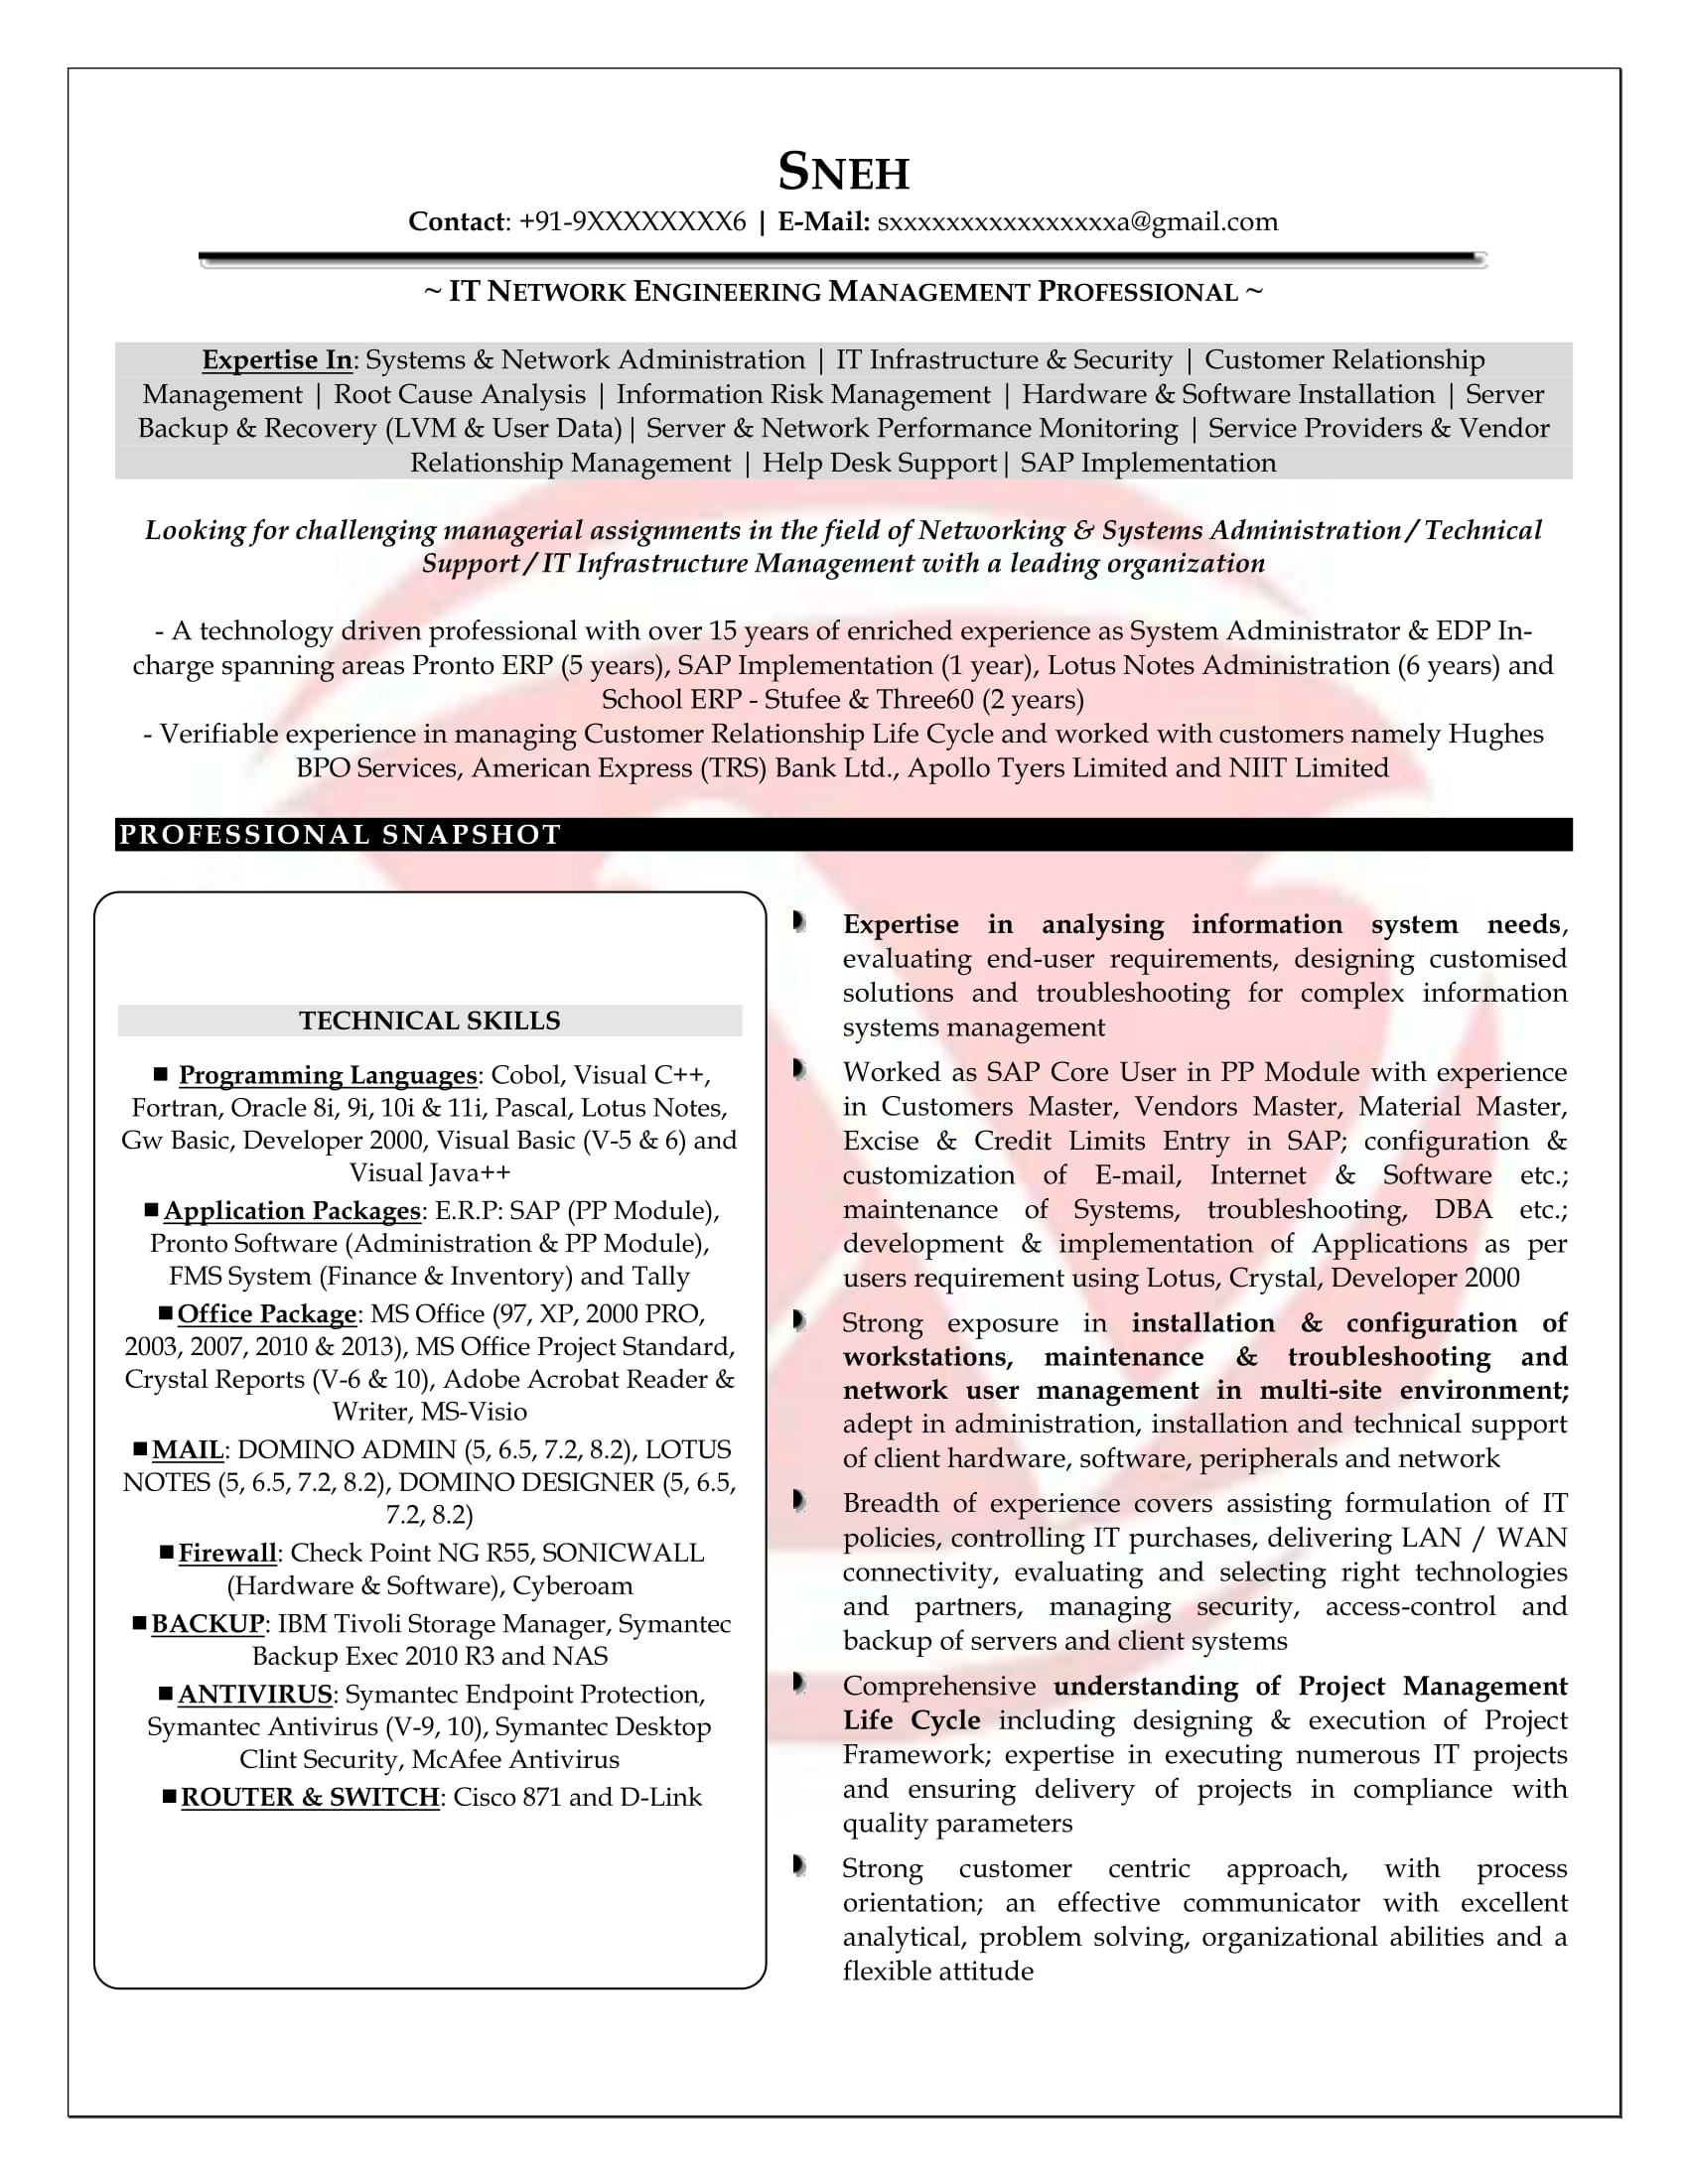 Network Engineer Resume Samples for Freshers Network Engineer Sample Resumes, Download Resume format Templates!